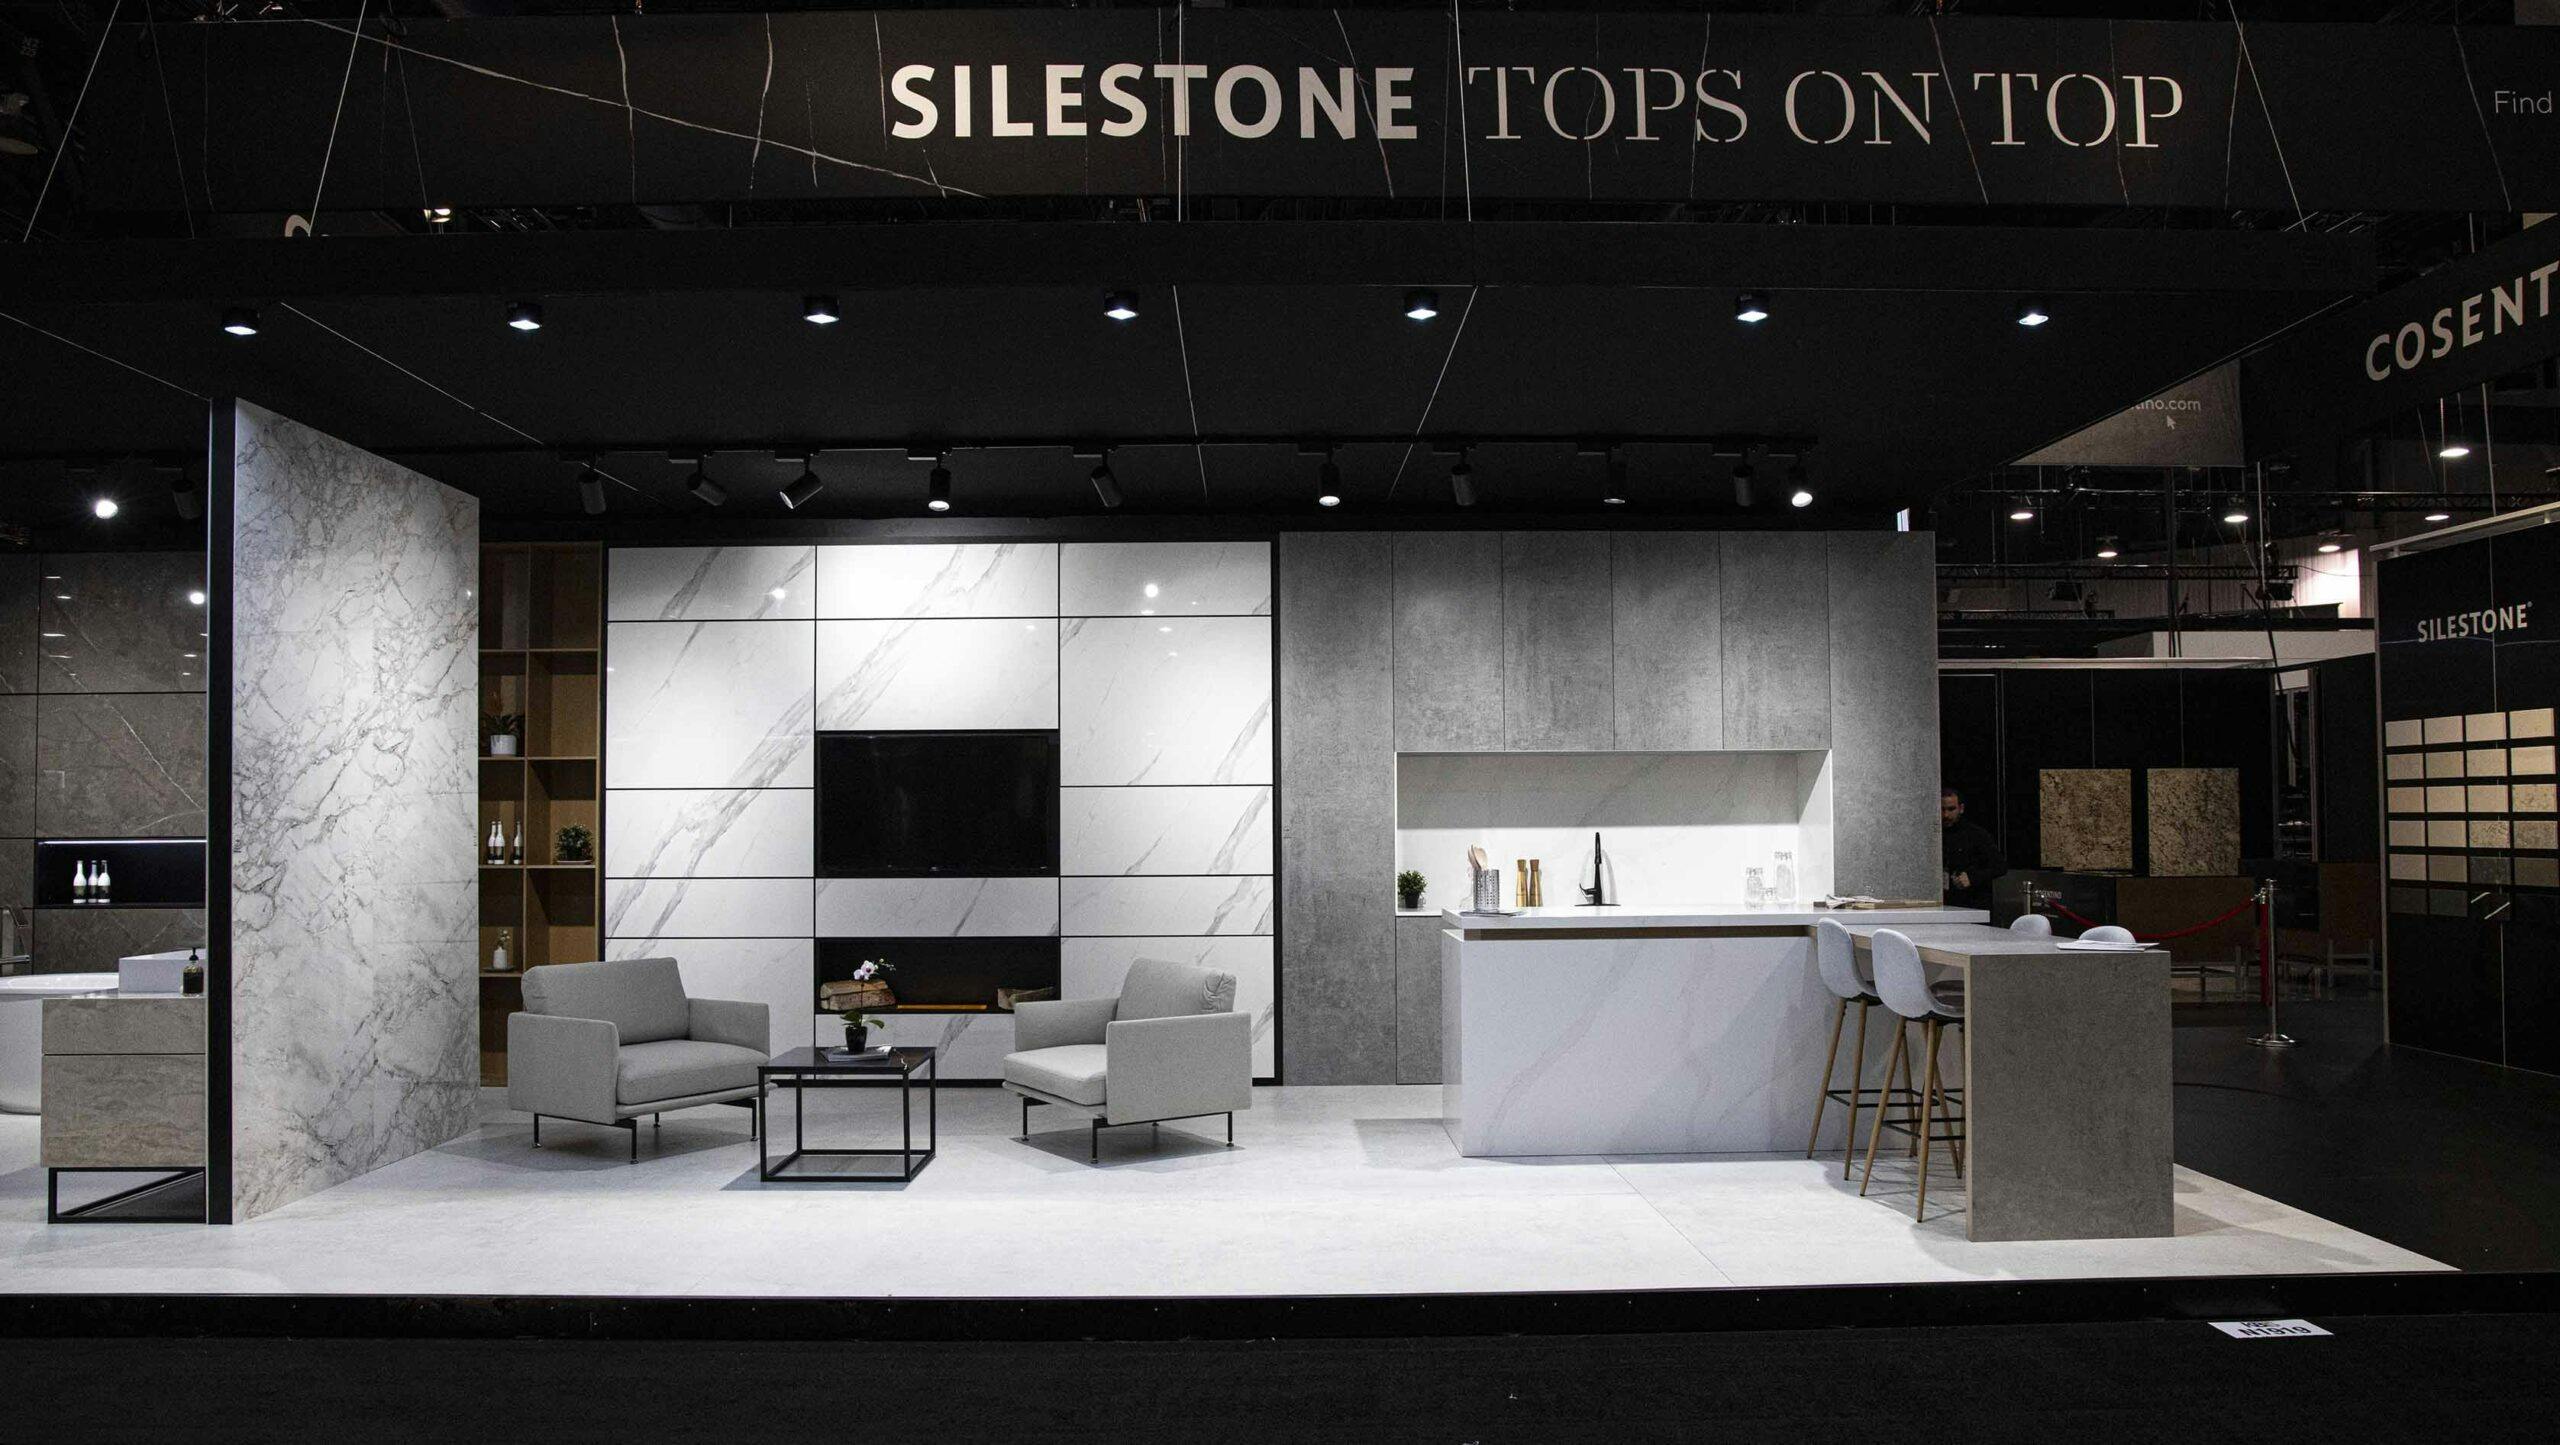 Image 33 of Stand Cosentino KBIS 2020 baja 1 1 scaled in Cosentino, leadership and innovation at KBIS 2020 - Cosentino